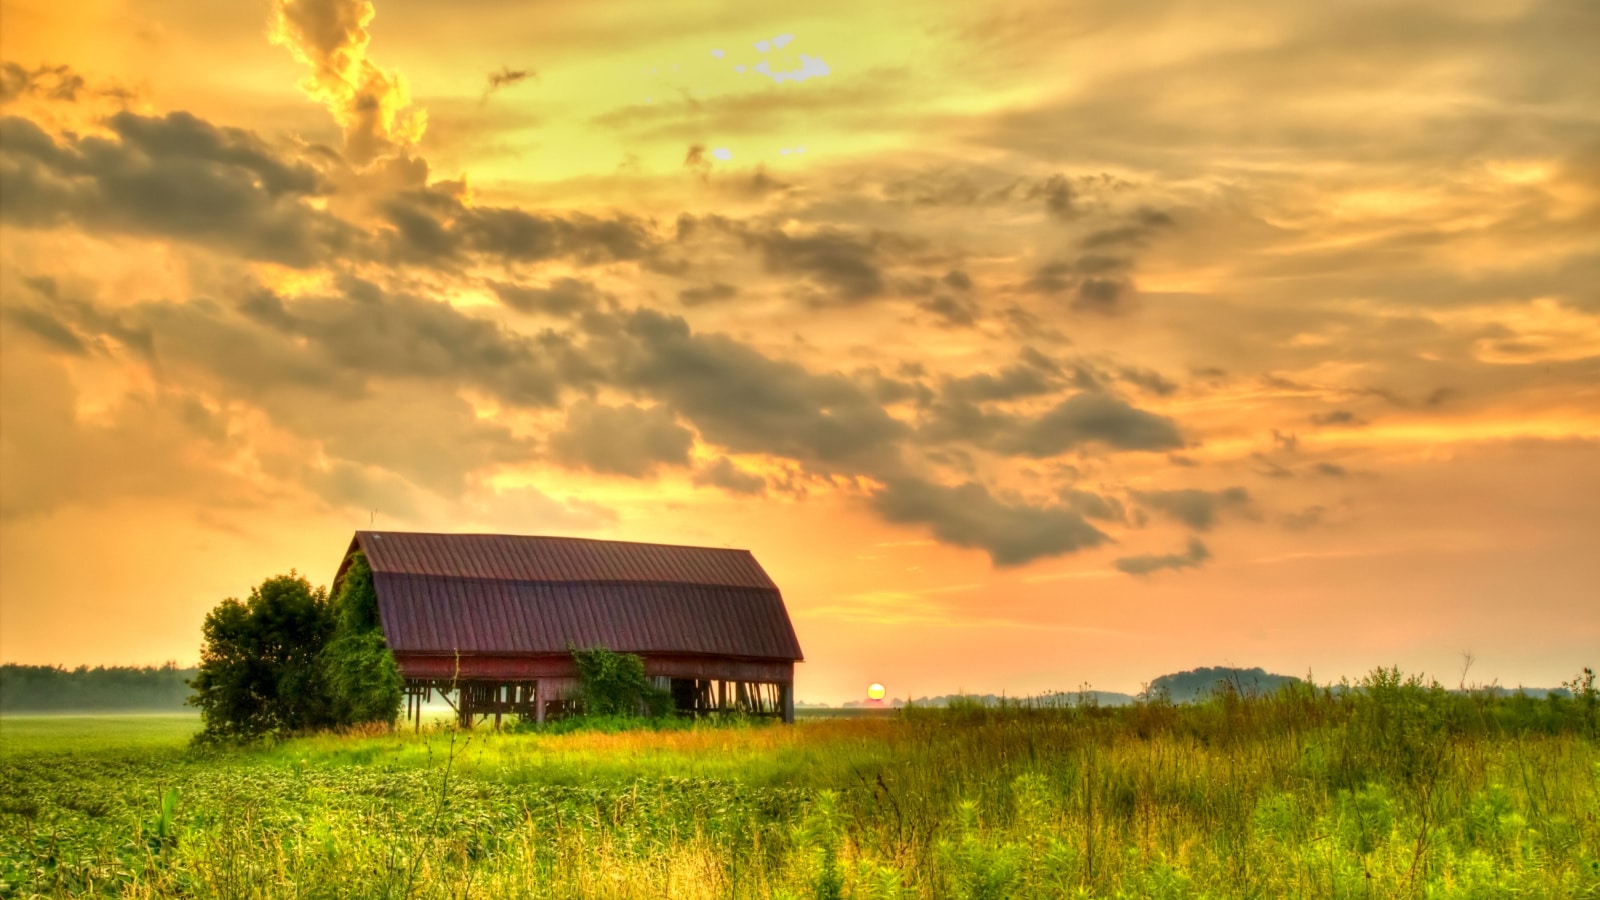 American Midwest Barn Landscape. Sunset over a farm field with a traditional red barn at the horizon.